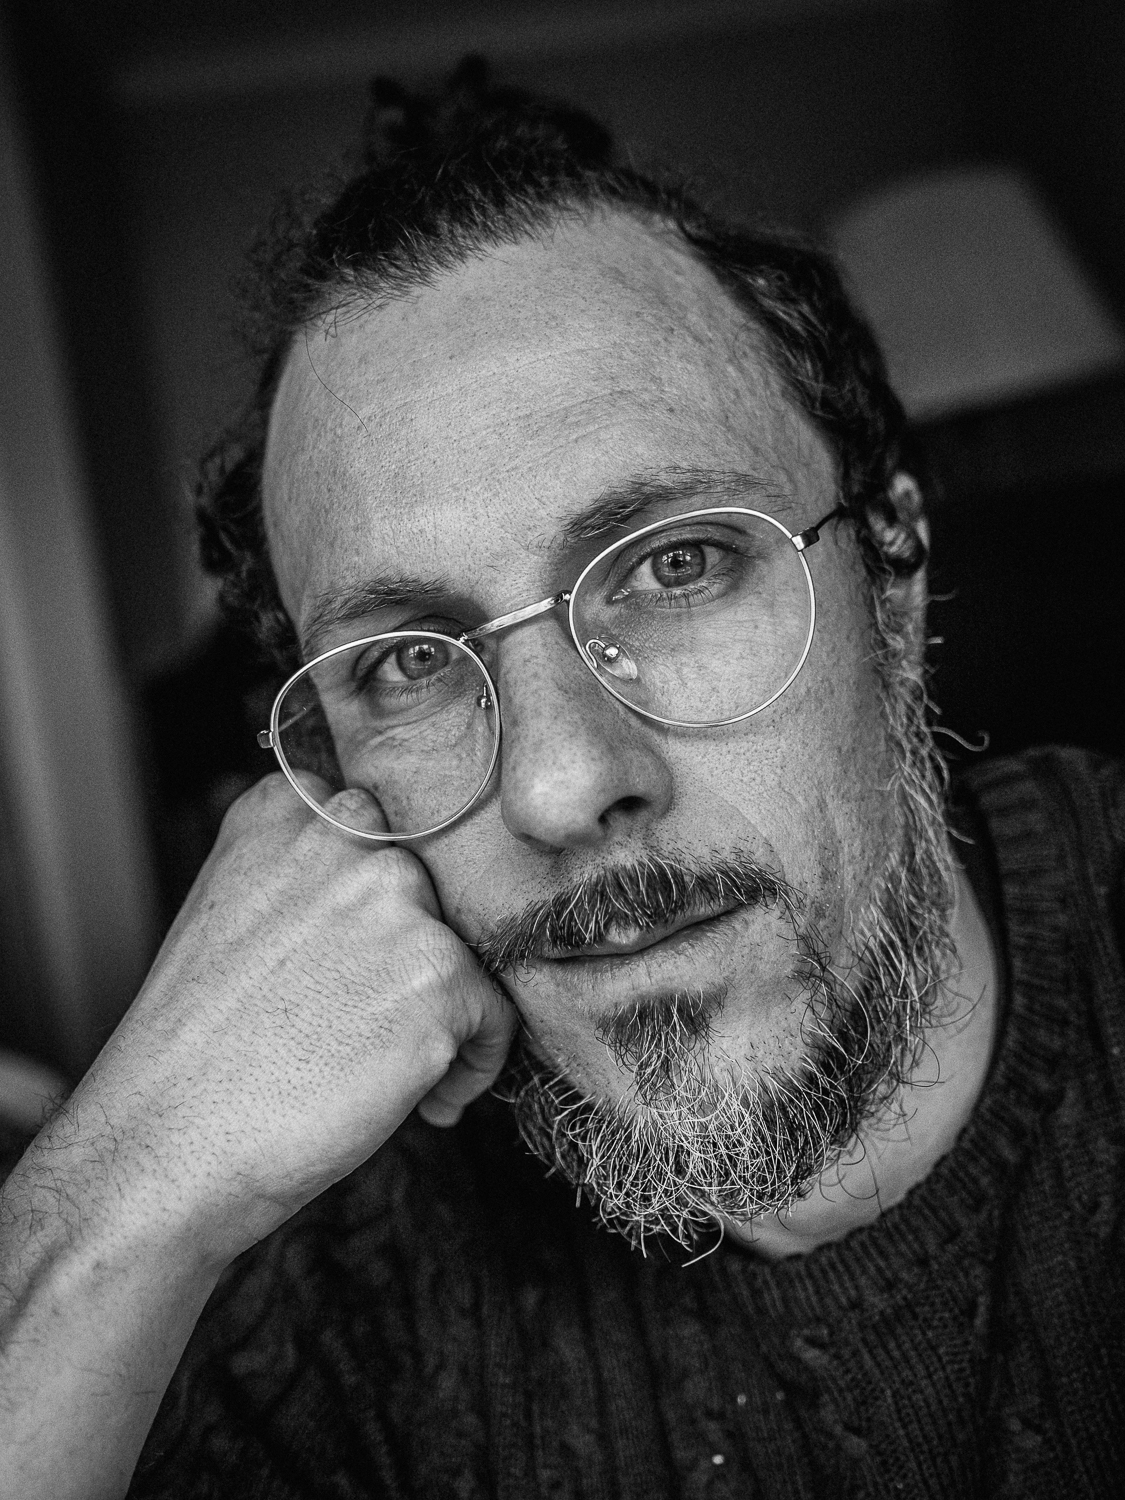 Black and white photo of a man with glasses and a scrappy beard, leaning on a loosely-clenched fist. He looks tired.